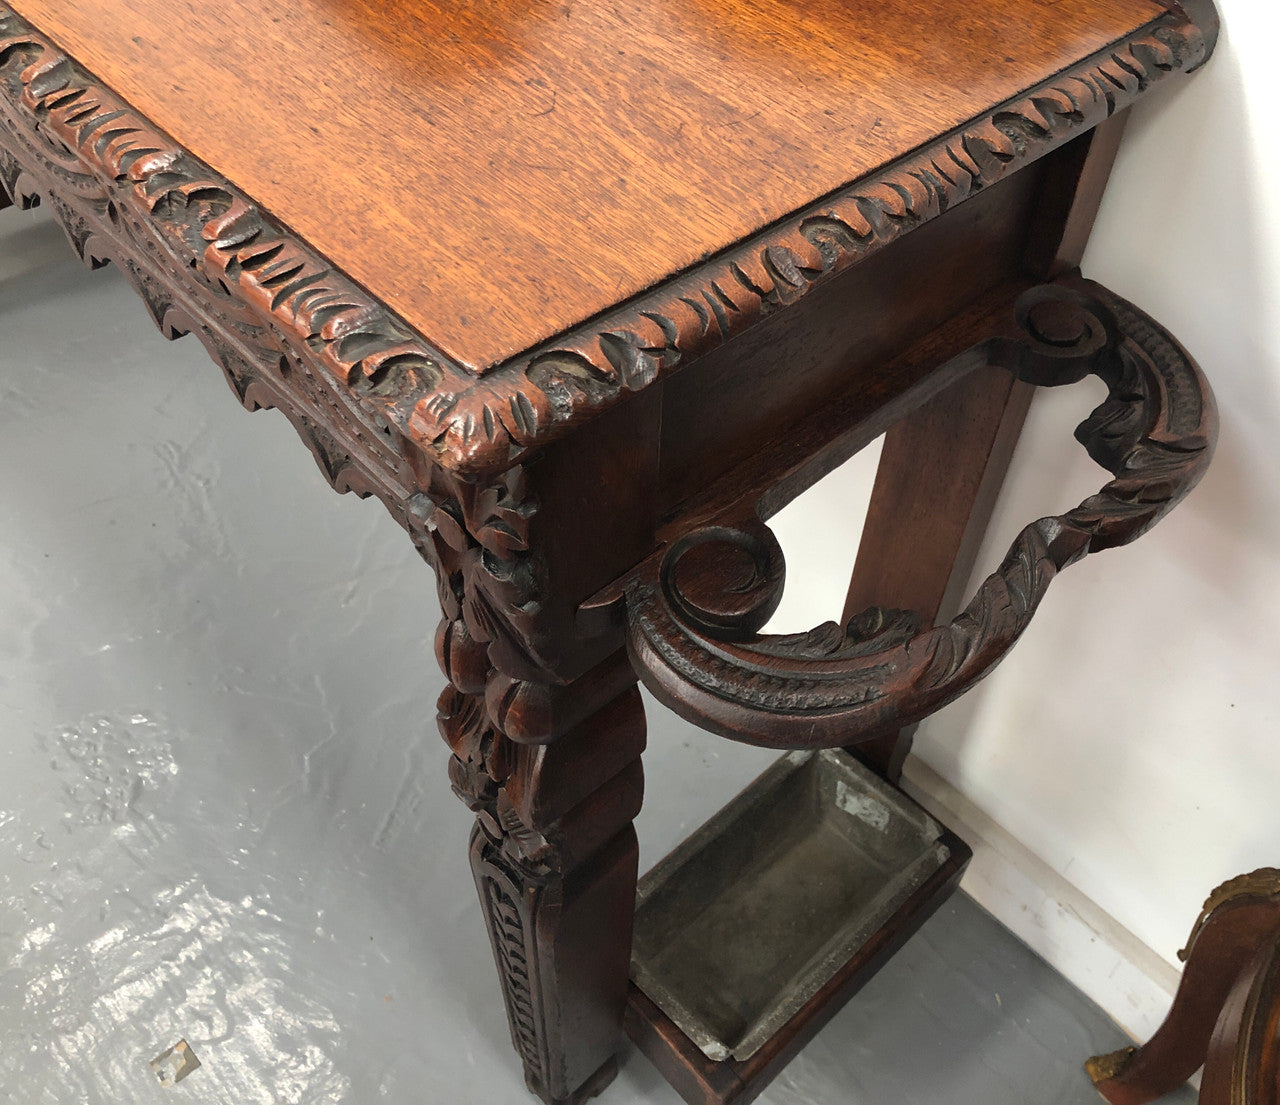 Superb 19th Century Gothic style hall/console table. It has umbrella and walking stick holders on both sides. In good original detailed condition.